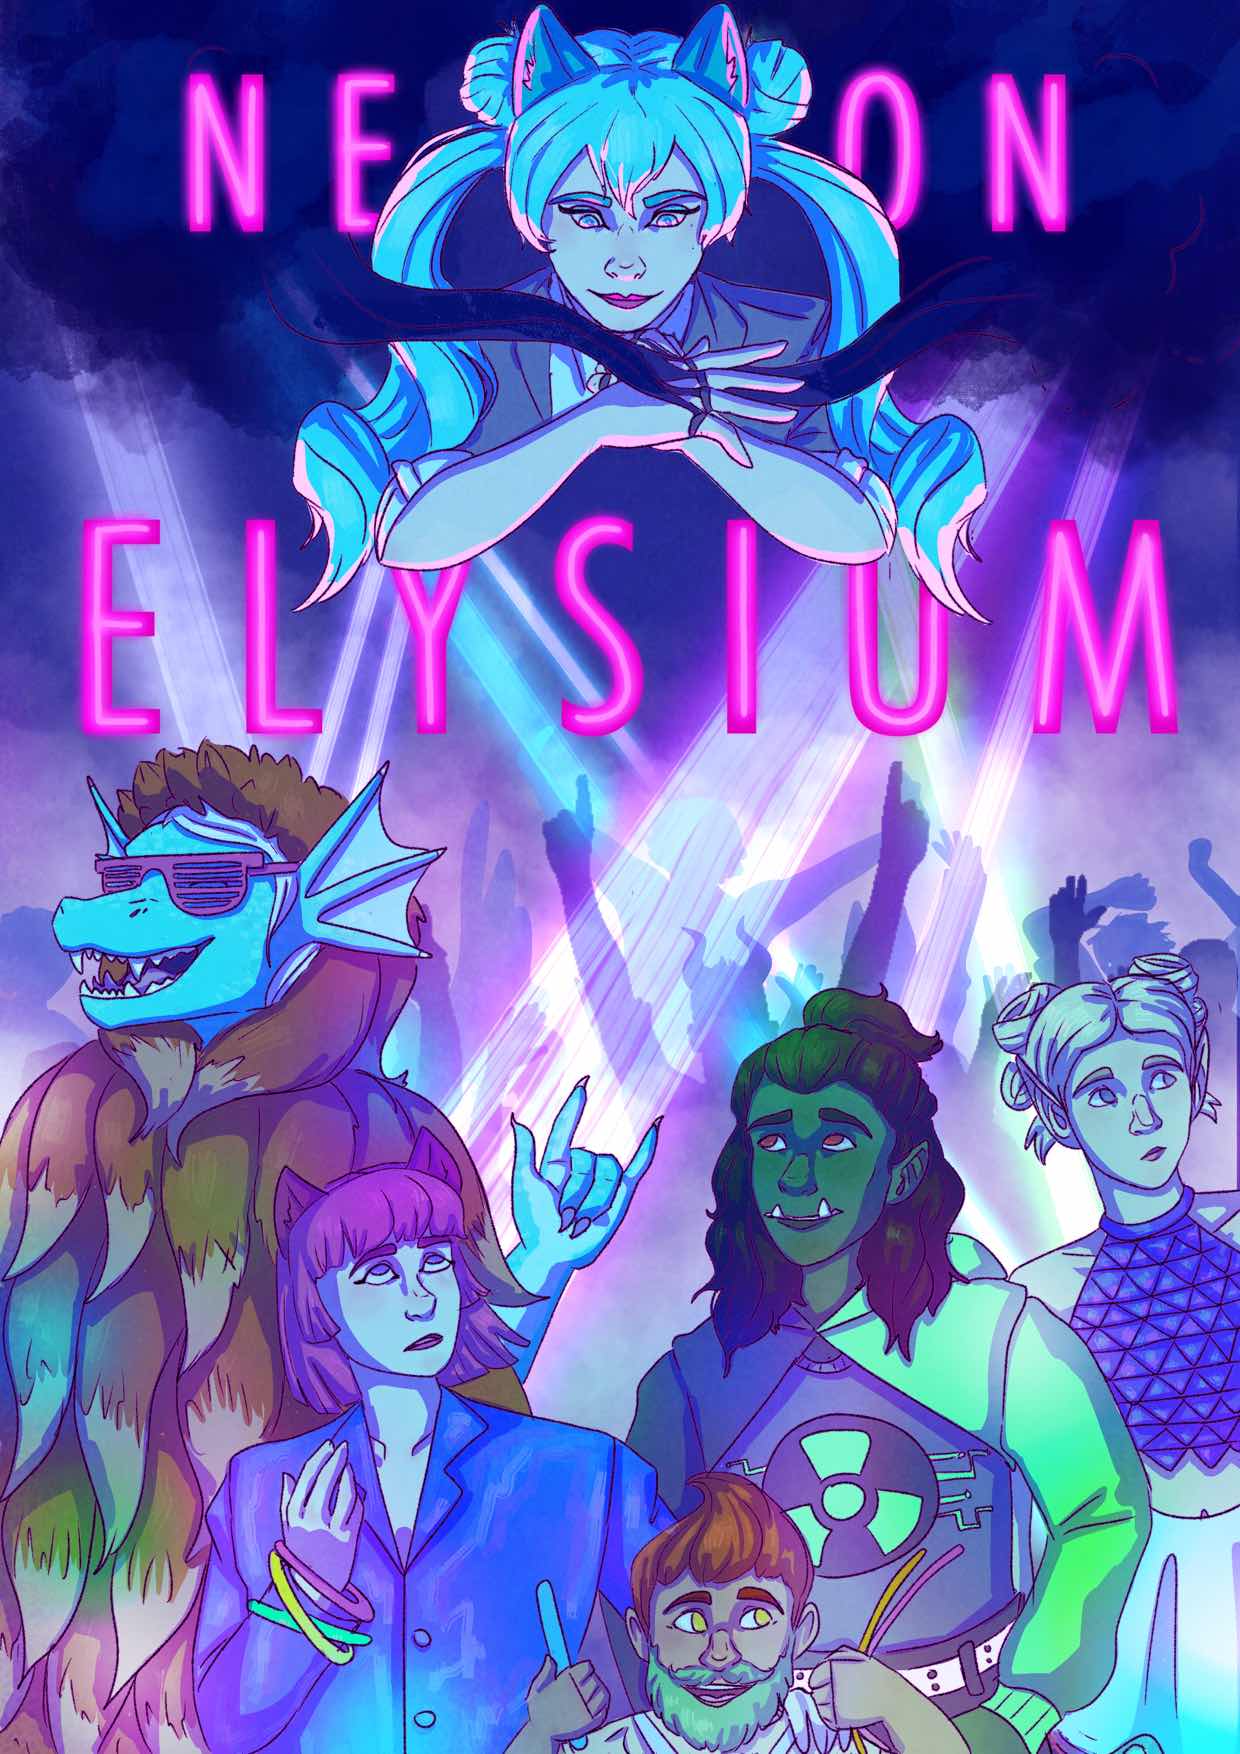 The Neon Elysium by Mel